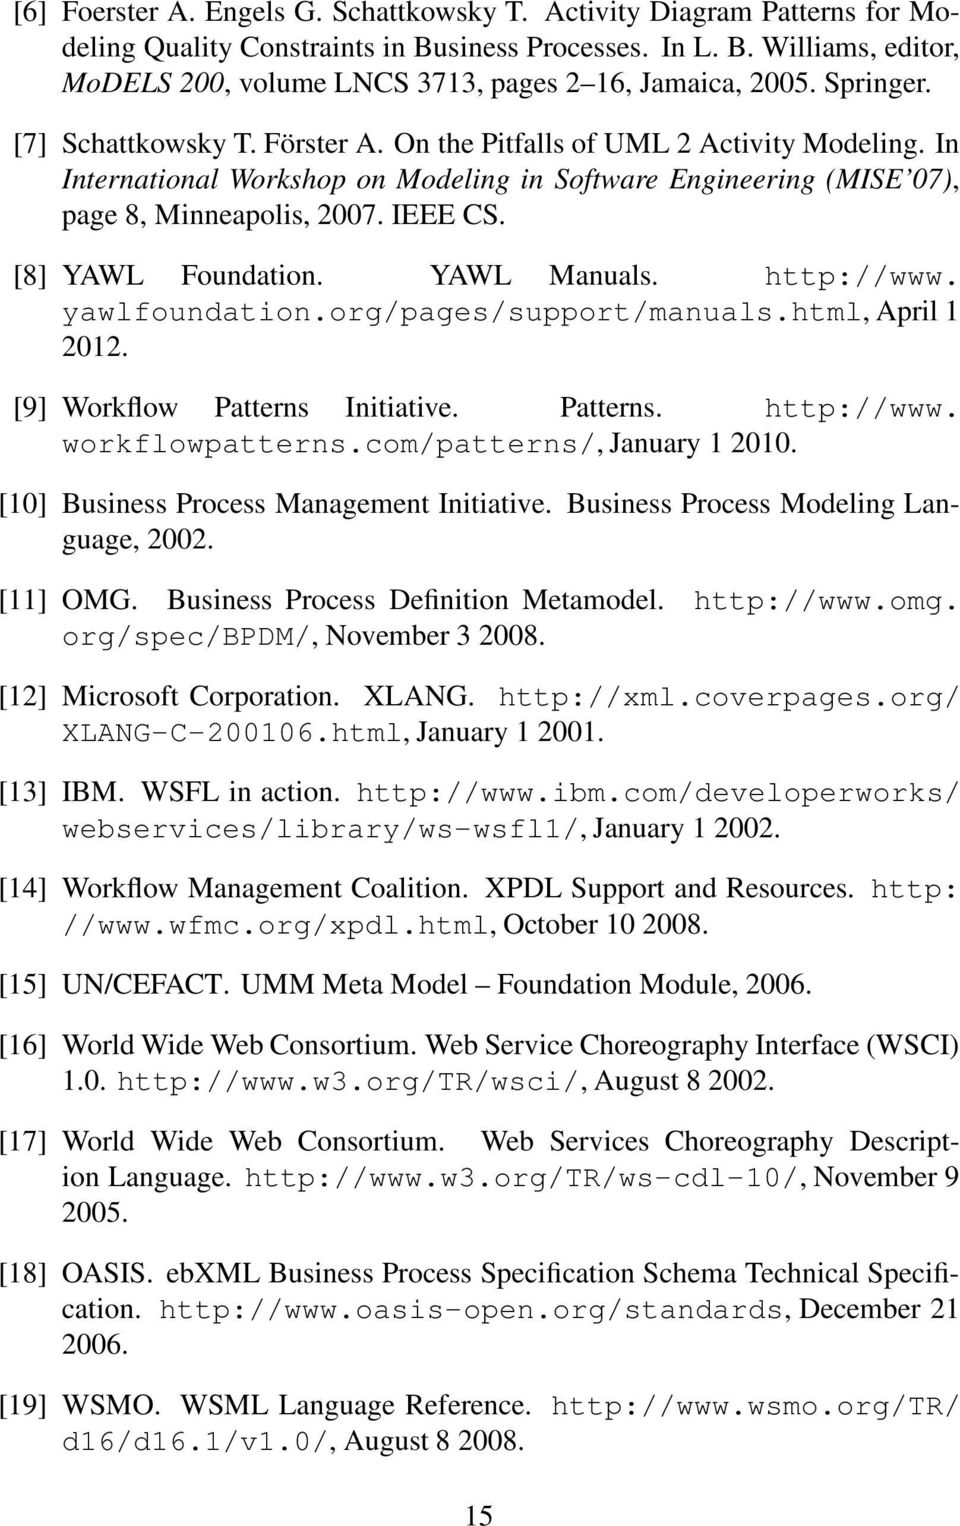 [8] YAWL Foundation. YAWL Manuals. http://www. yawlfoundation.org/pages/support/manuals.html, April 1 2012. [9] Workflow Patterns Initiative. Patterns. http://www. workflowpatterns.